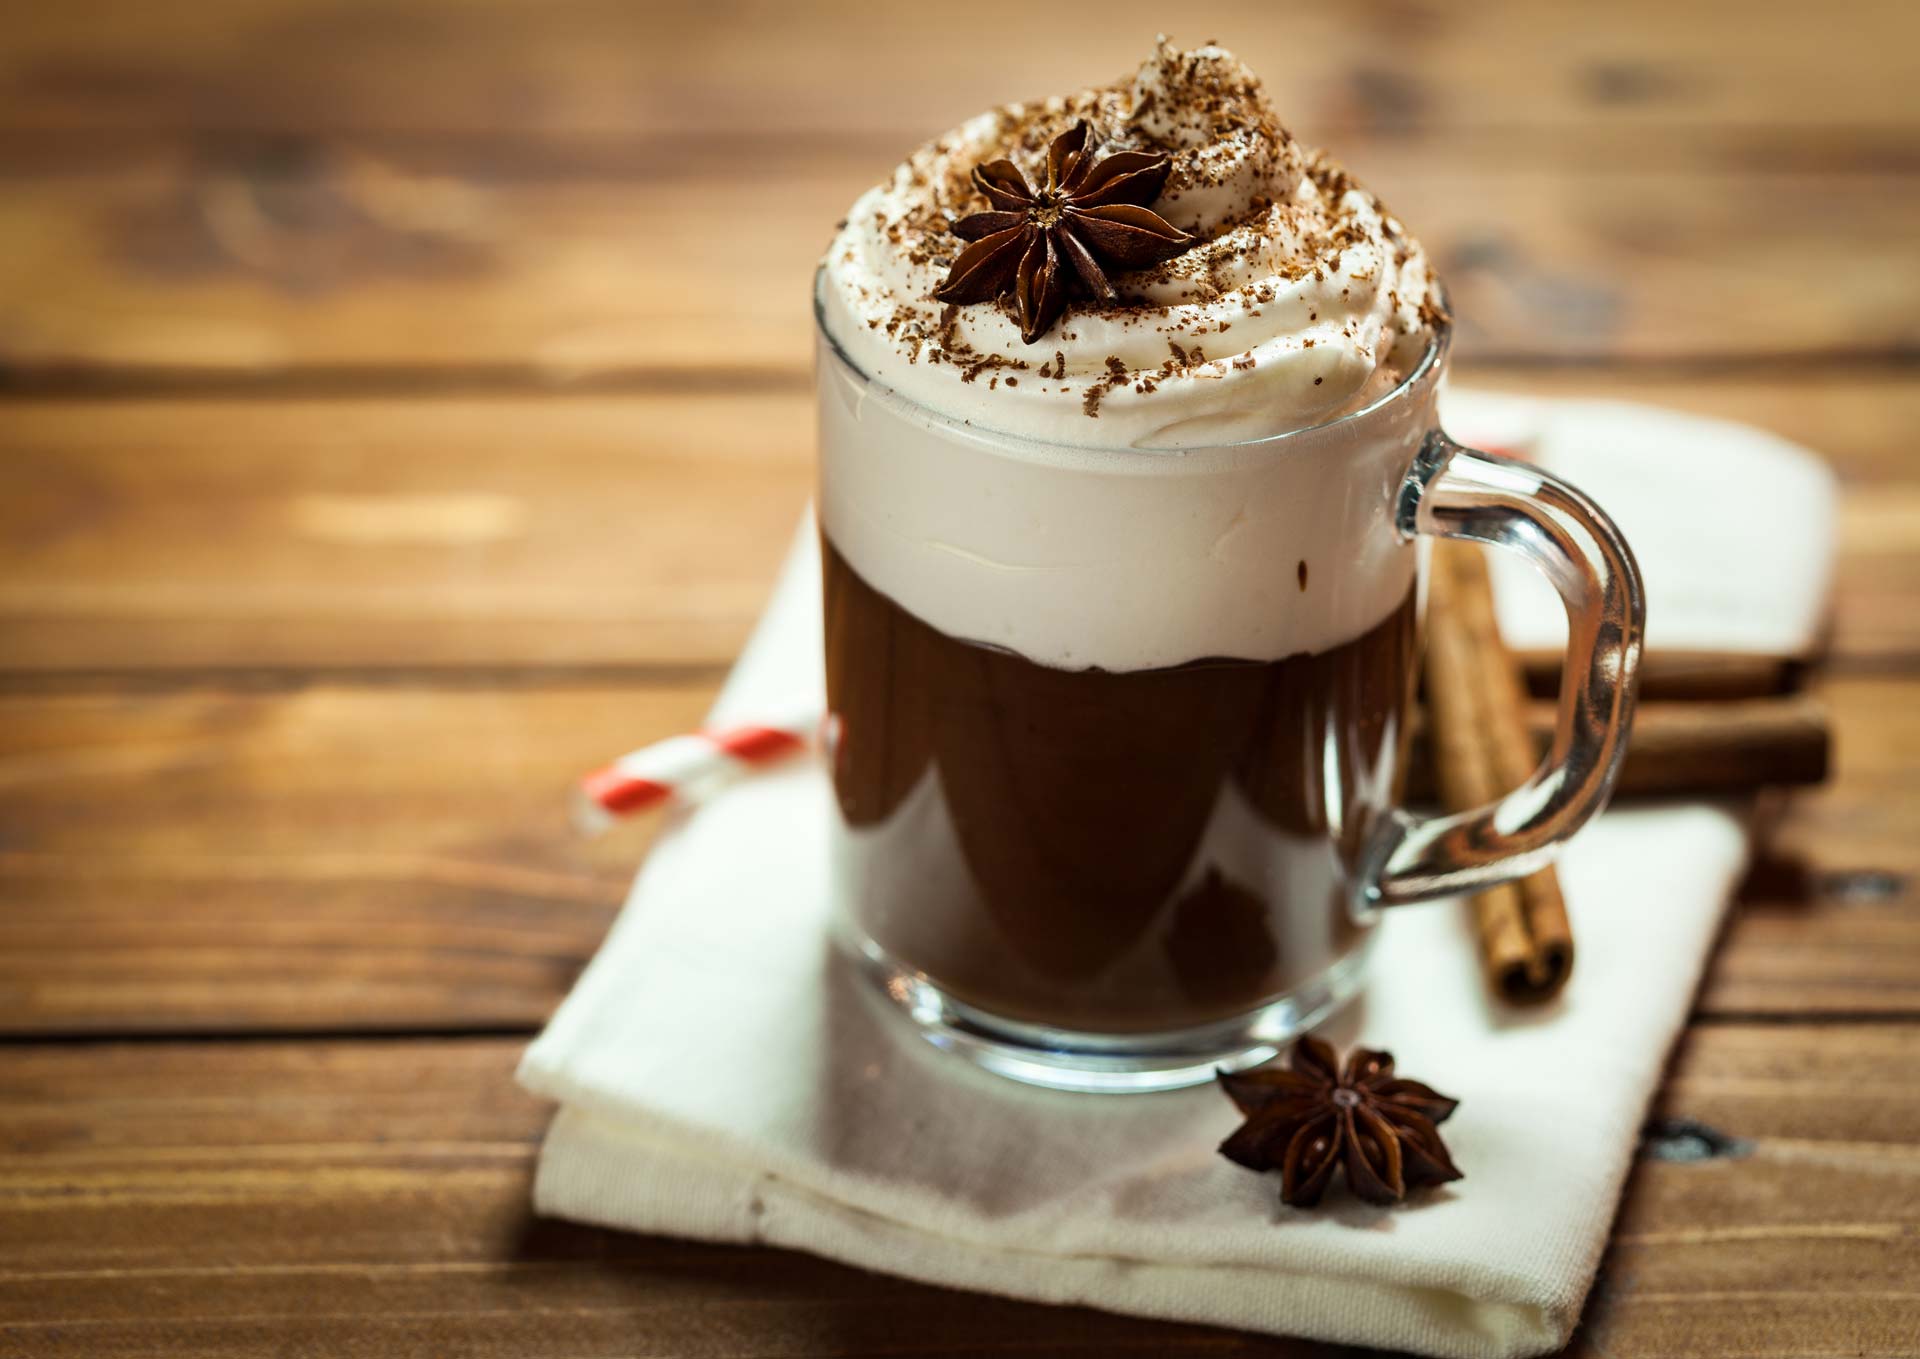 A glass of hot cocoa anise with chocolate sprinkled on top